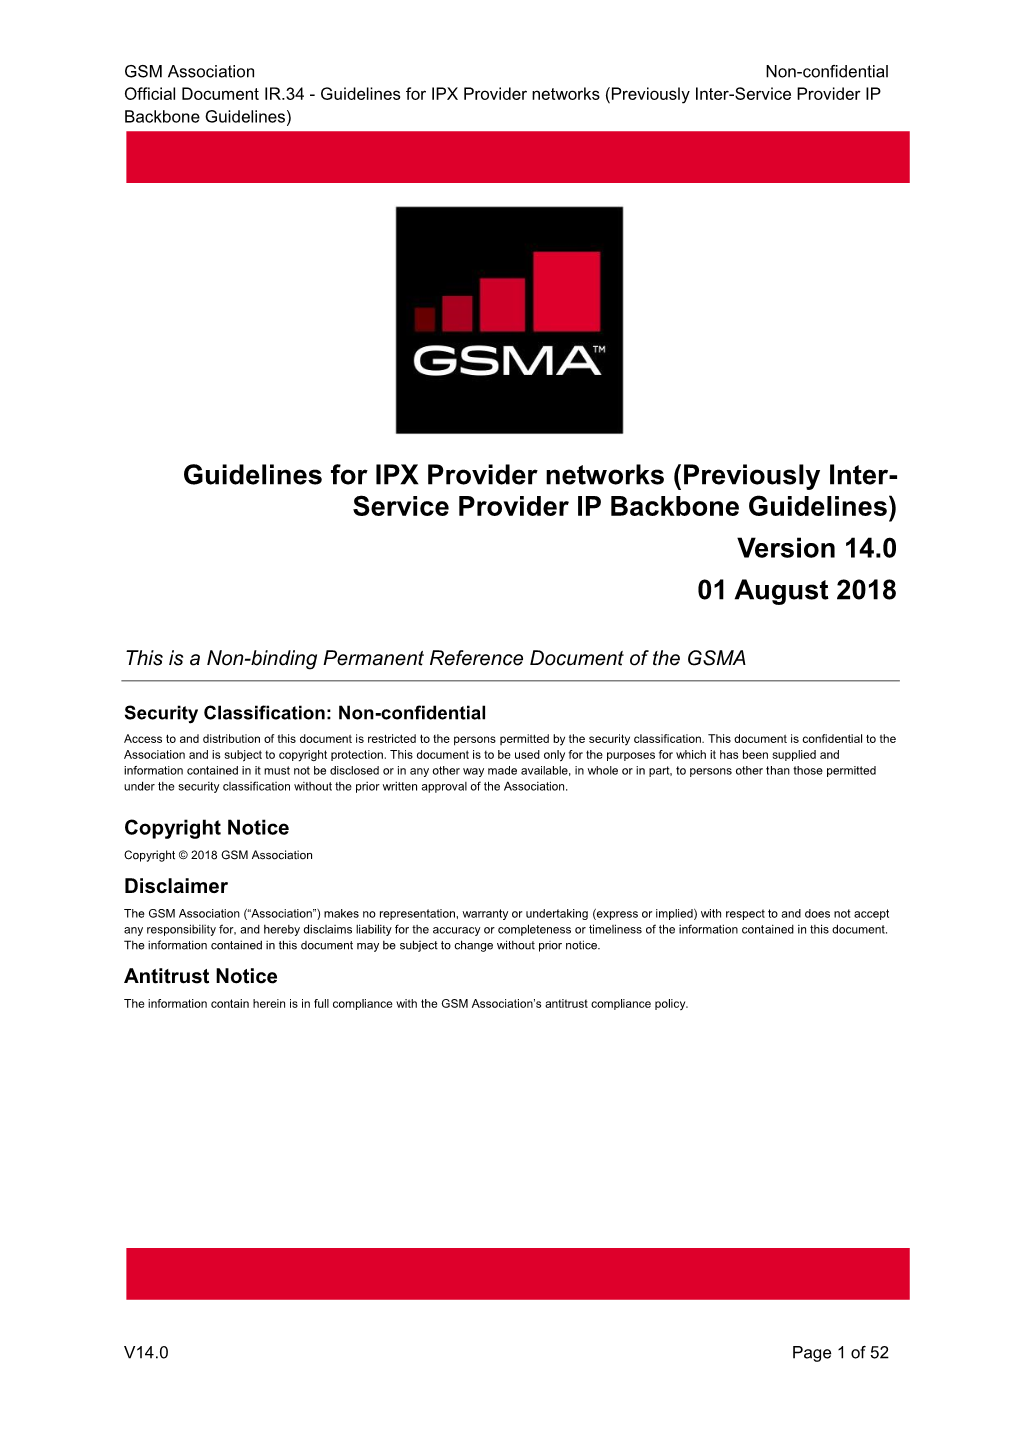 Guidelines for IPX Provider Networks (Previously Inter- Service Provider IP Backbone Guidelines) Version 14.0 01 August 2018